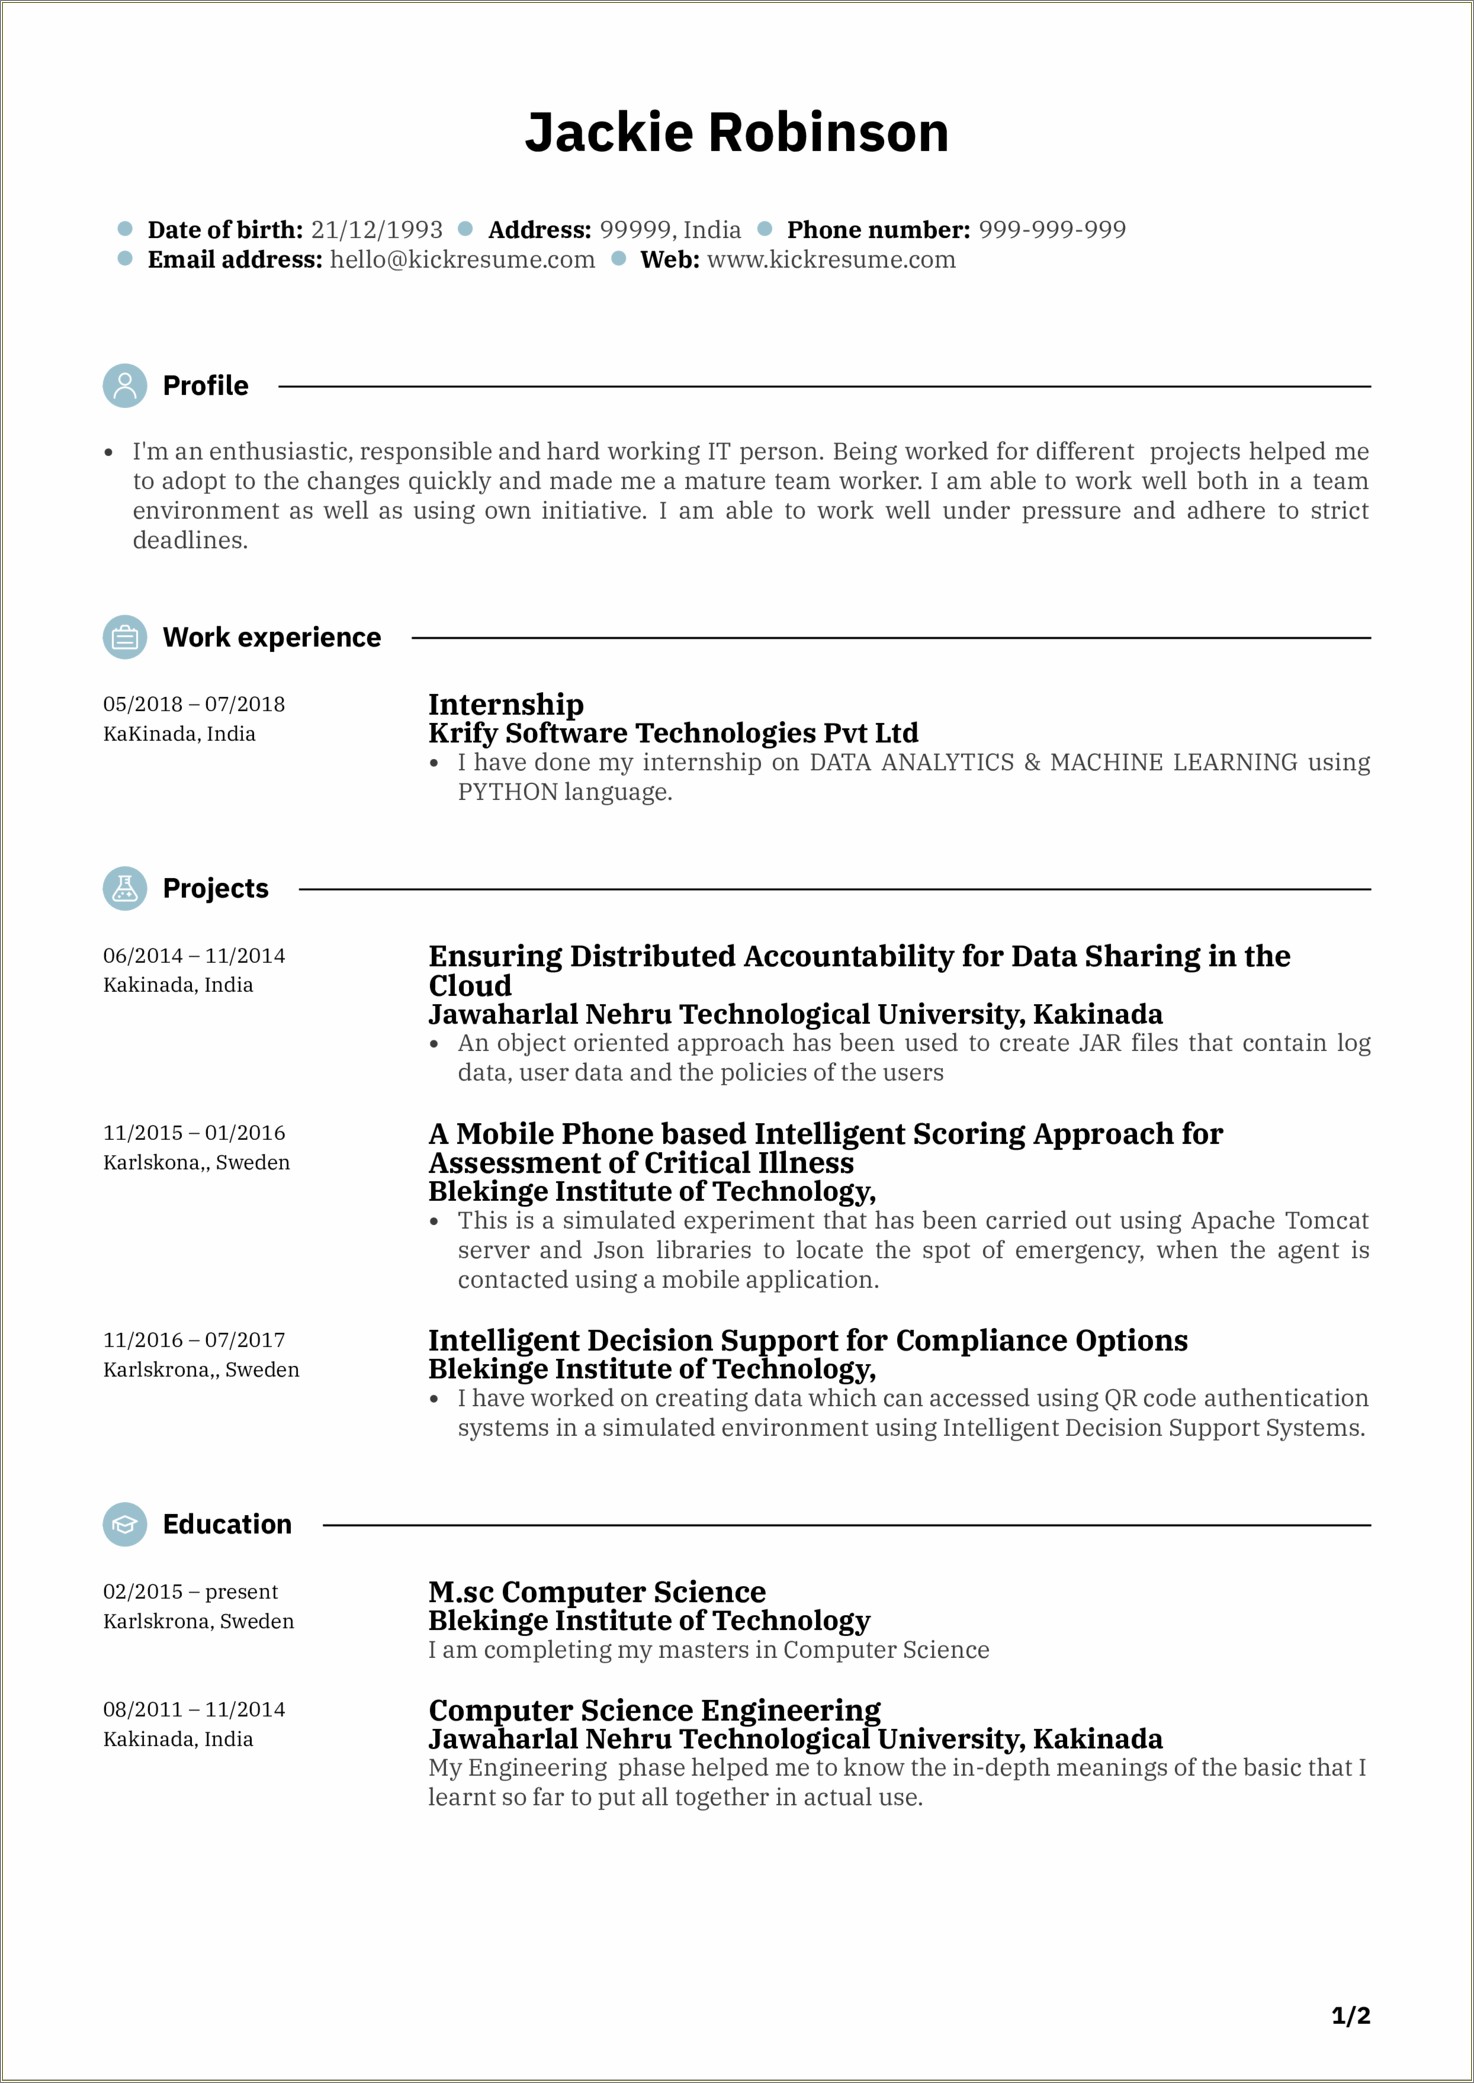 Resume Objective Lines For Computer Engineer